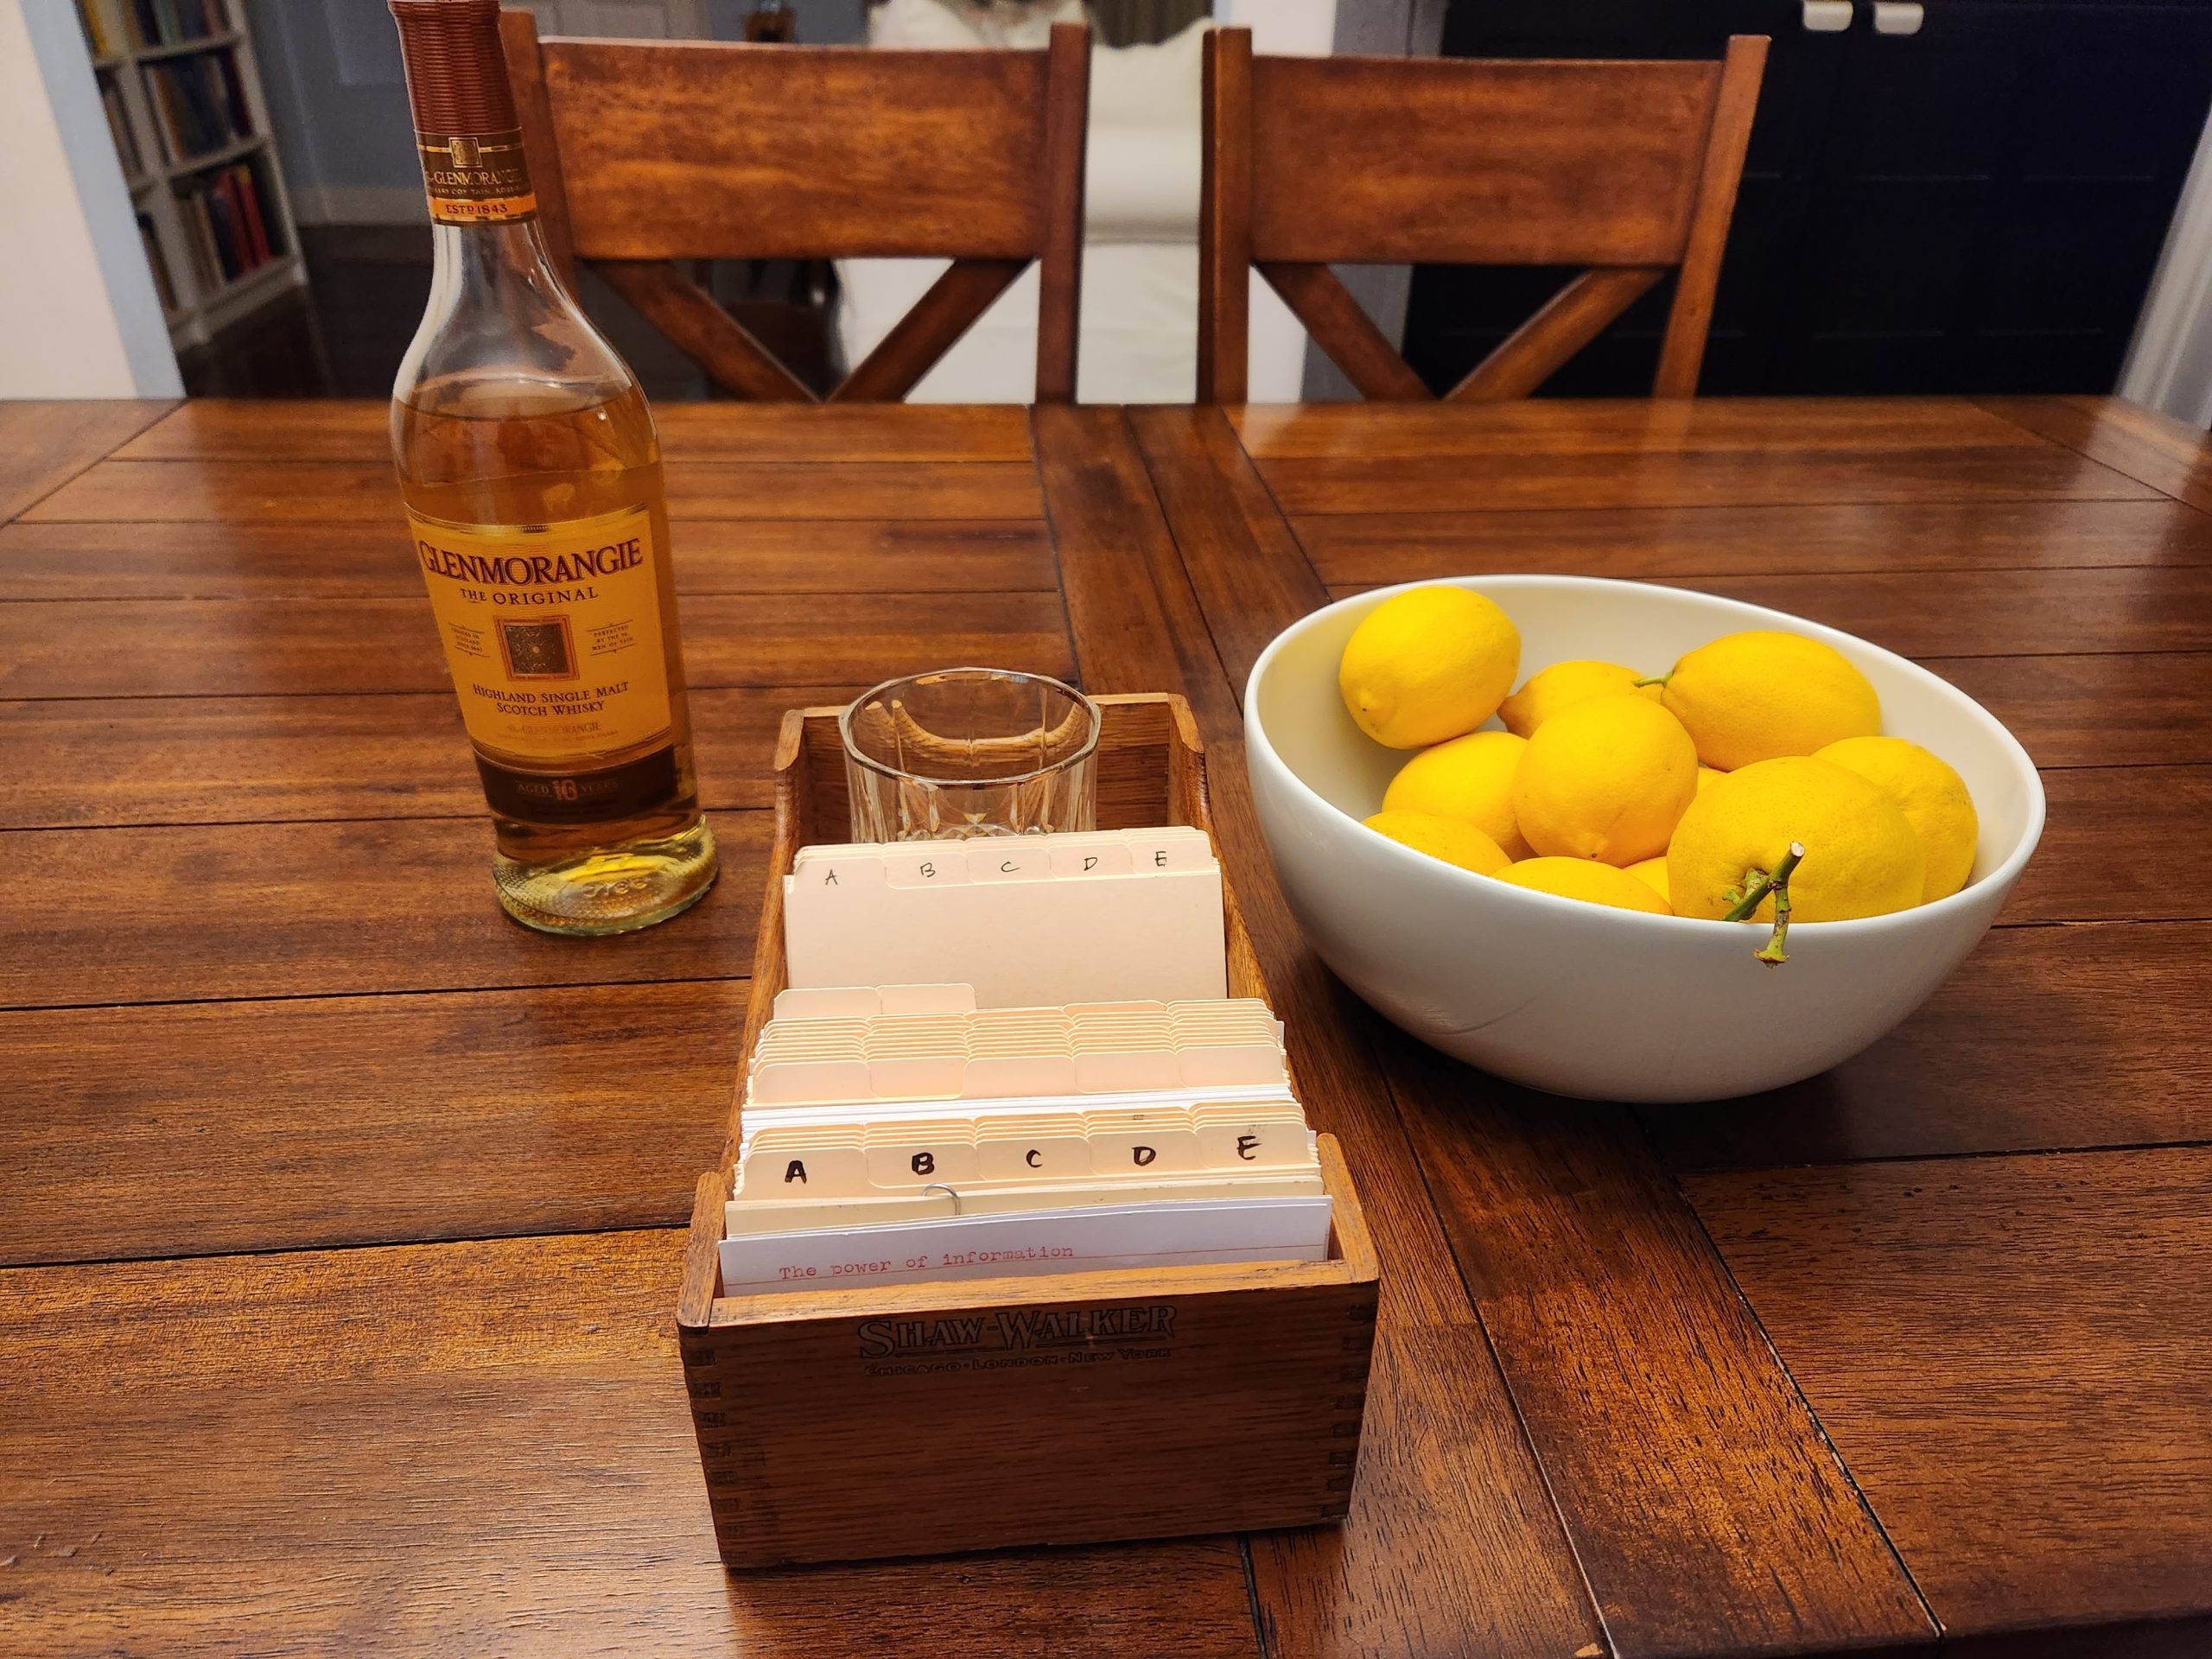 A crystal old fashioned glass serves as a following block to some index cards and card dividers in a Shaw-Walker card index box (zettelkasten). On the table next to the index are a fifth of Scotch (Glenmorangie) and a bowl of lemons.